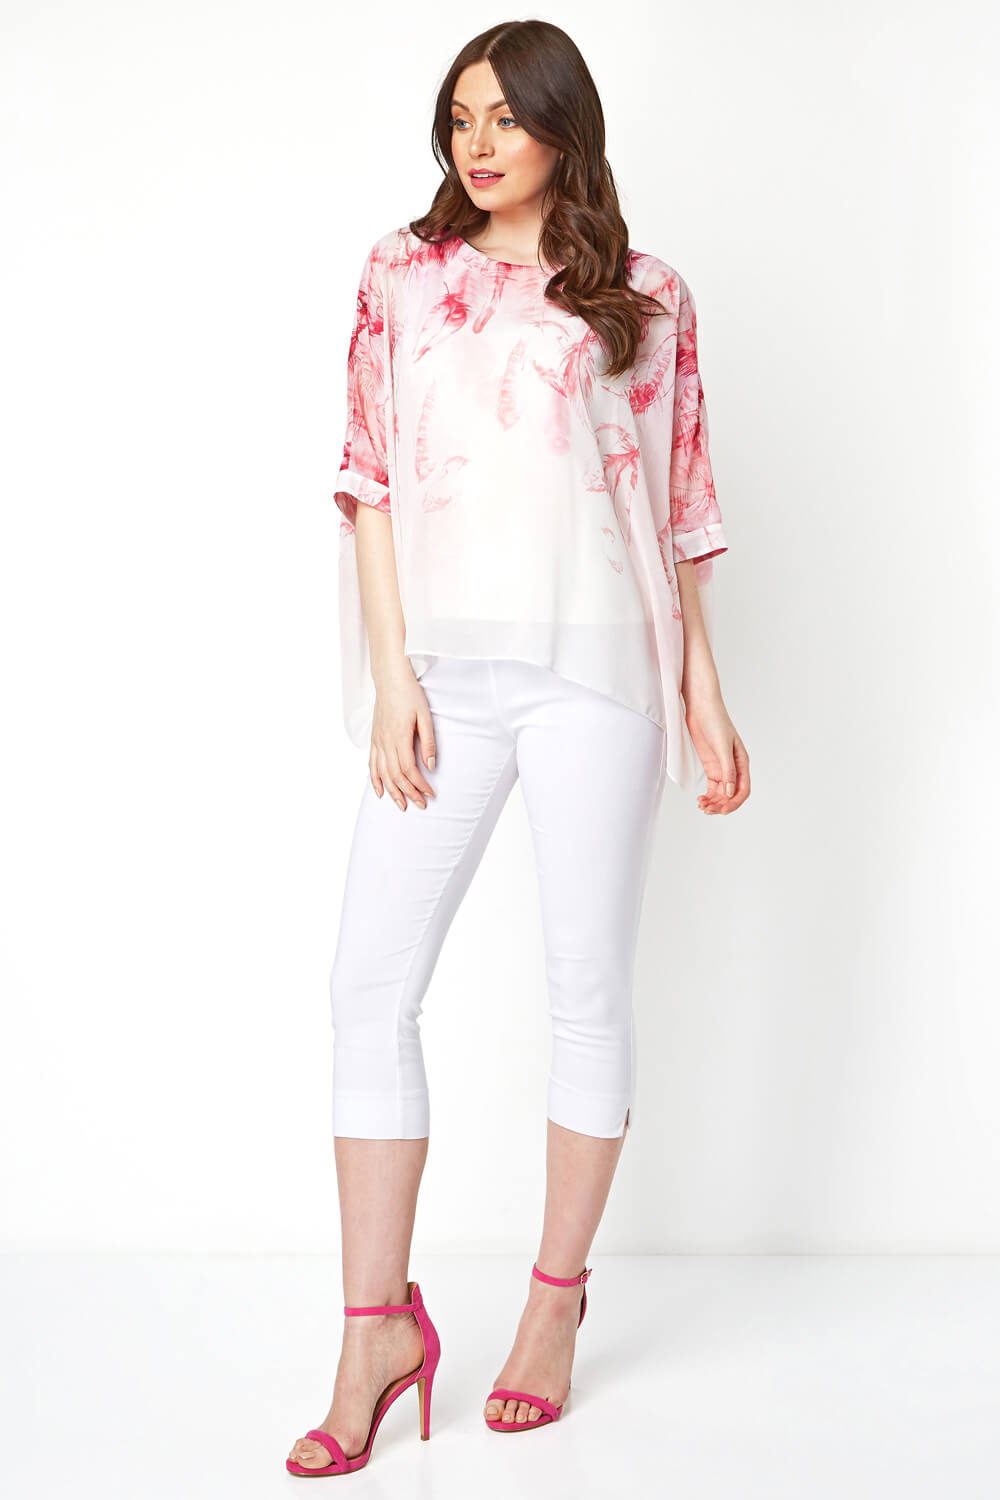 PINK Feather Border Print Overlay Top, Image 2 of 8